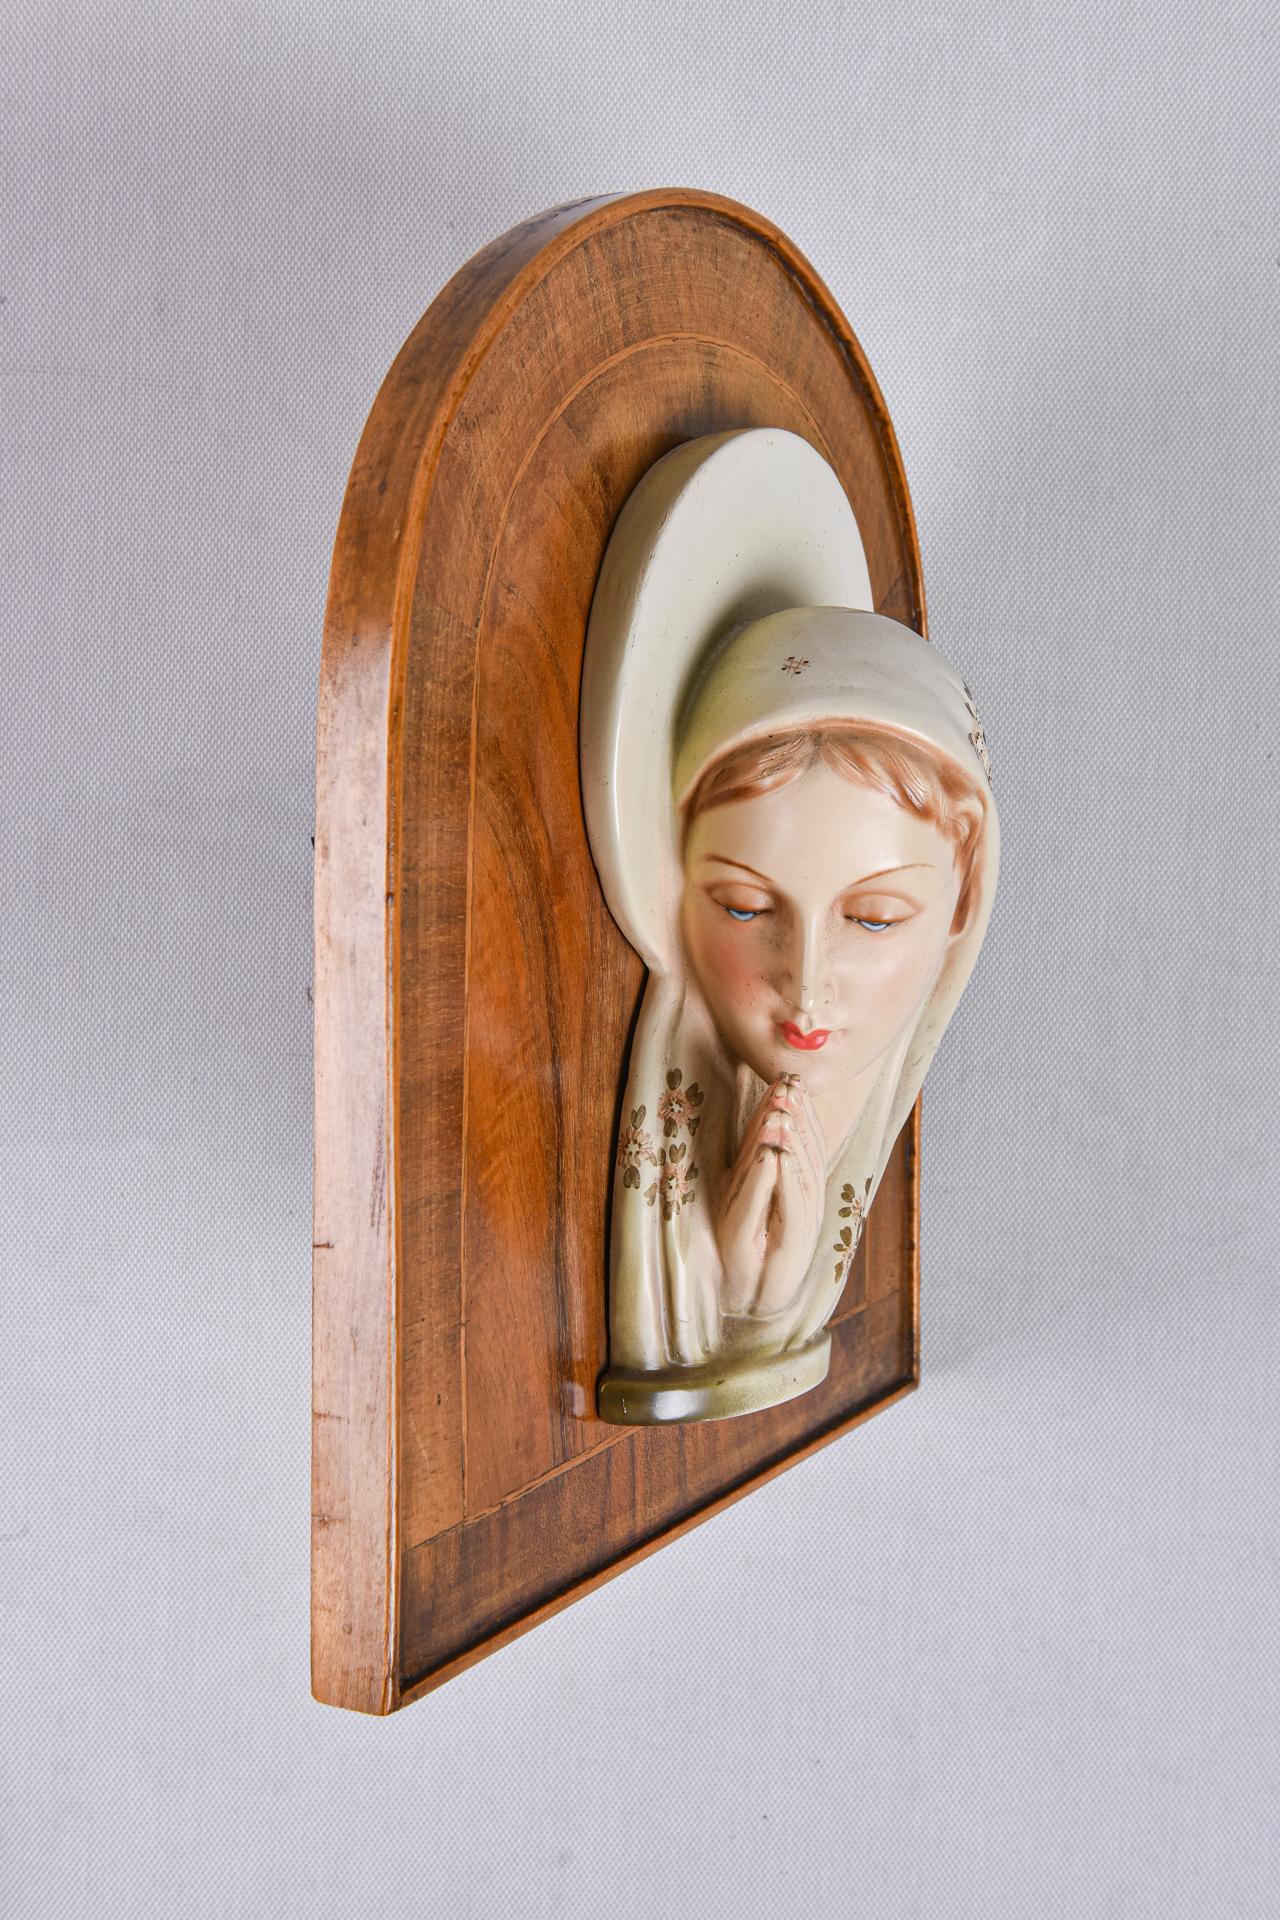 Madonna in ceramic high or bas relief on a wooden panel base, from the Déco era.  Little flowers painted on the Madonna veil.
It's delicious !